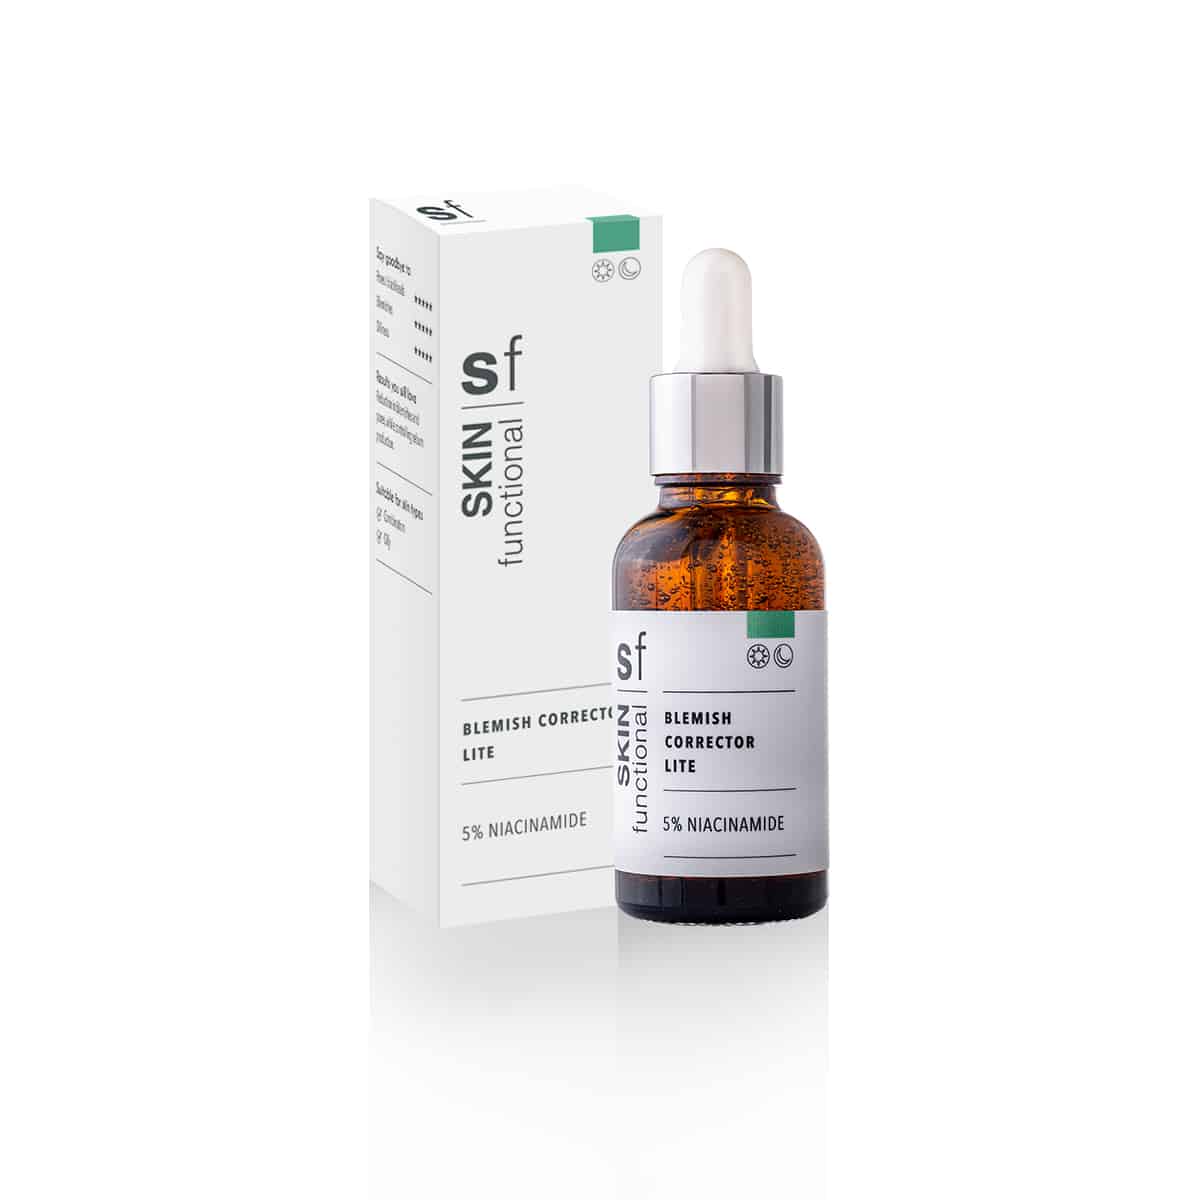 A bottle of SKIN Functional - 5% Niacinamide - Blemish Corrector Lite on a white background.